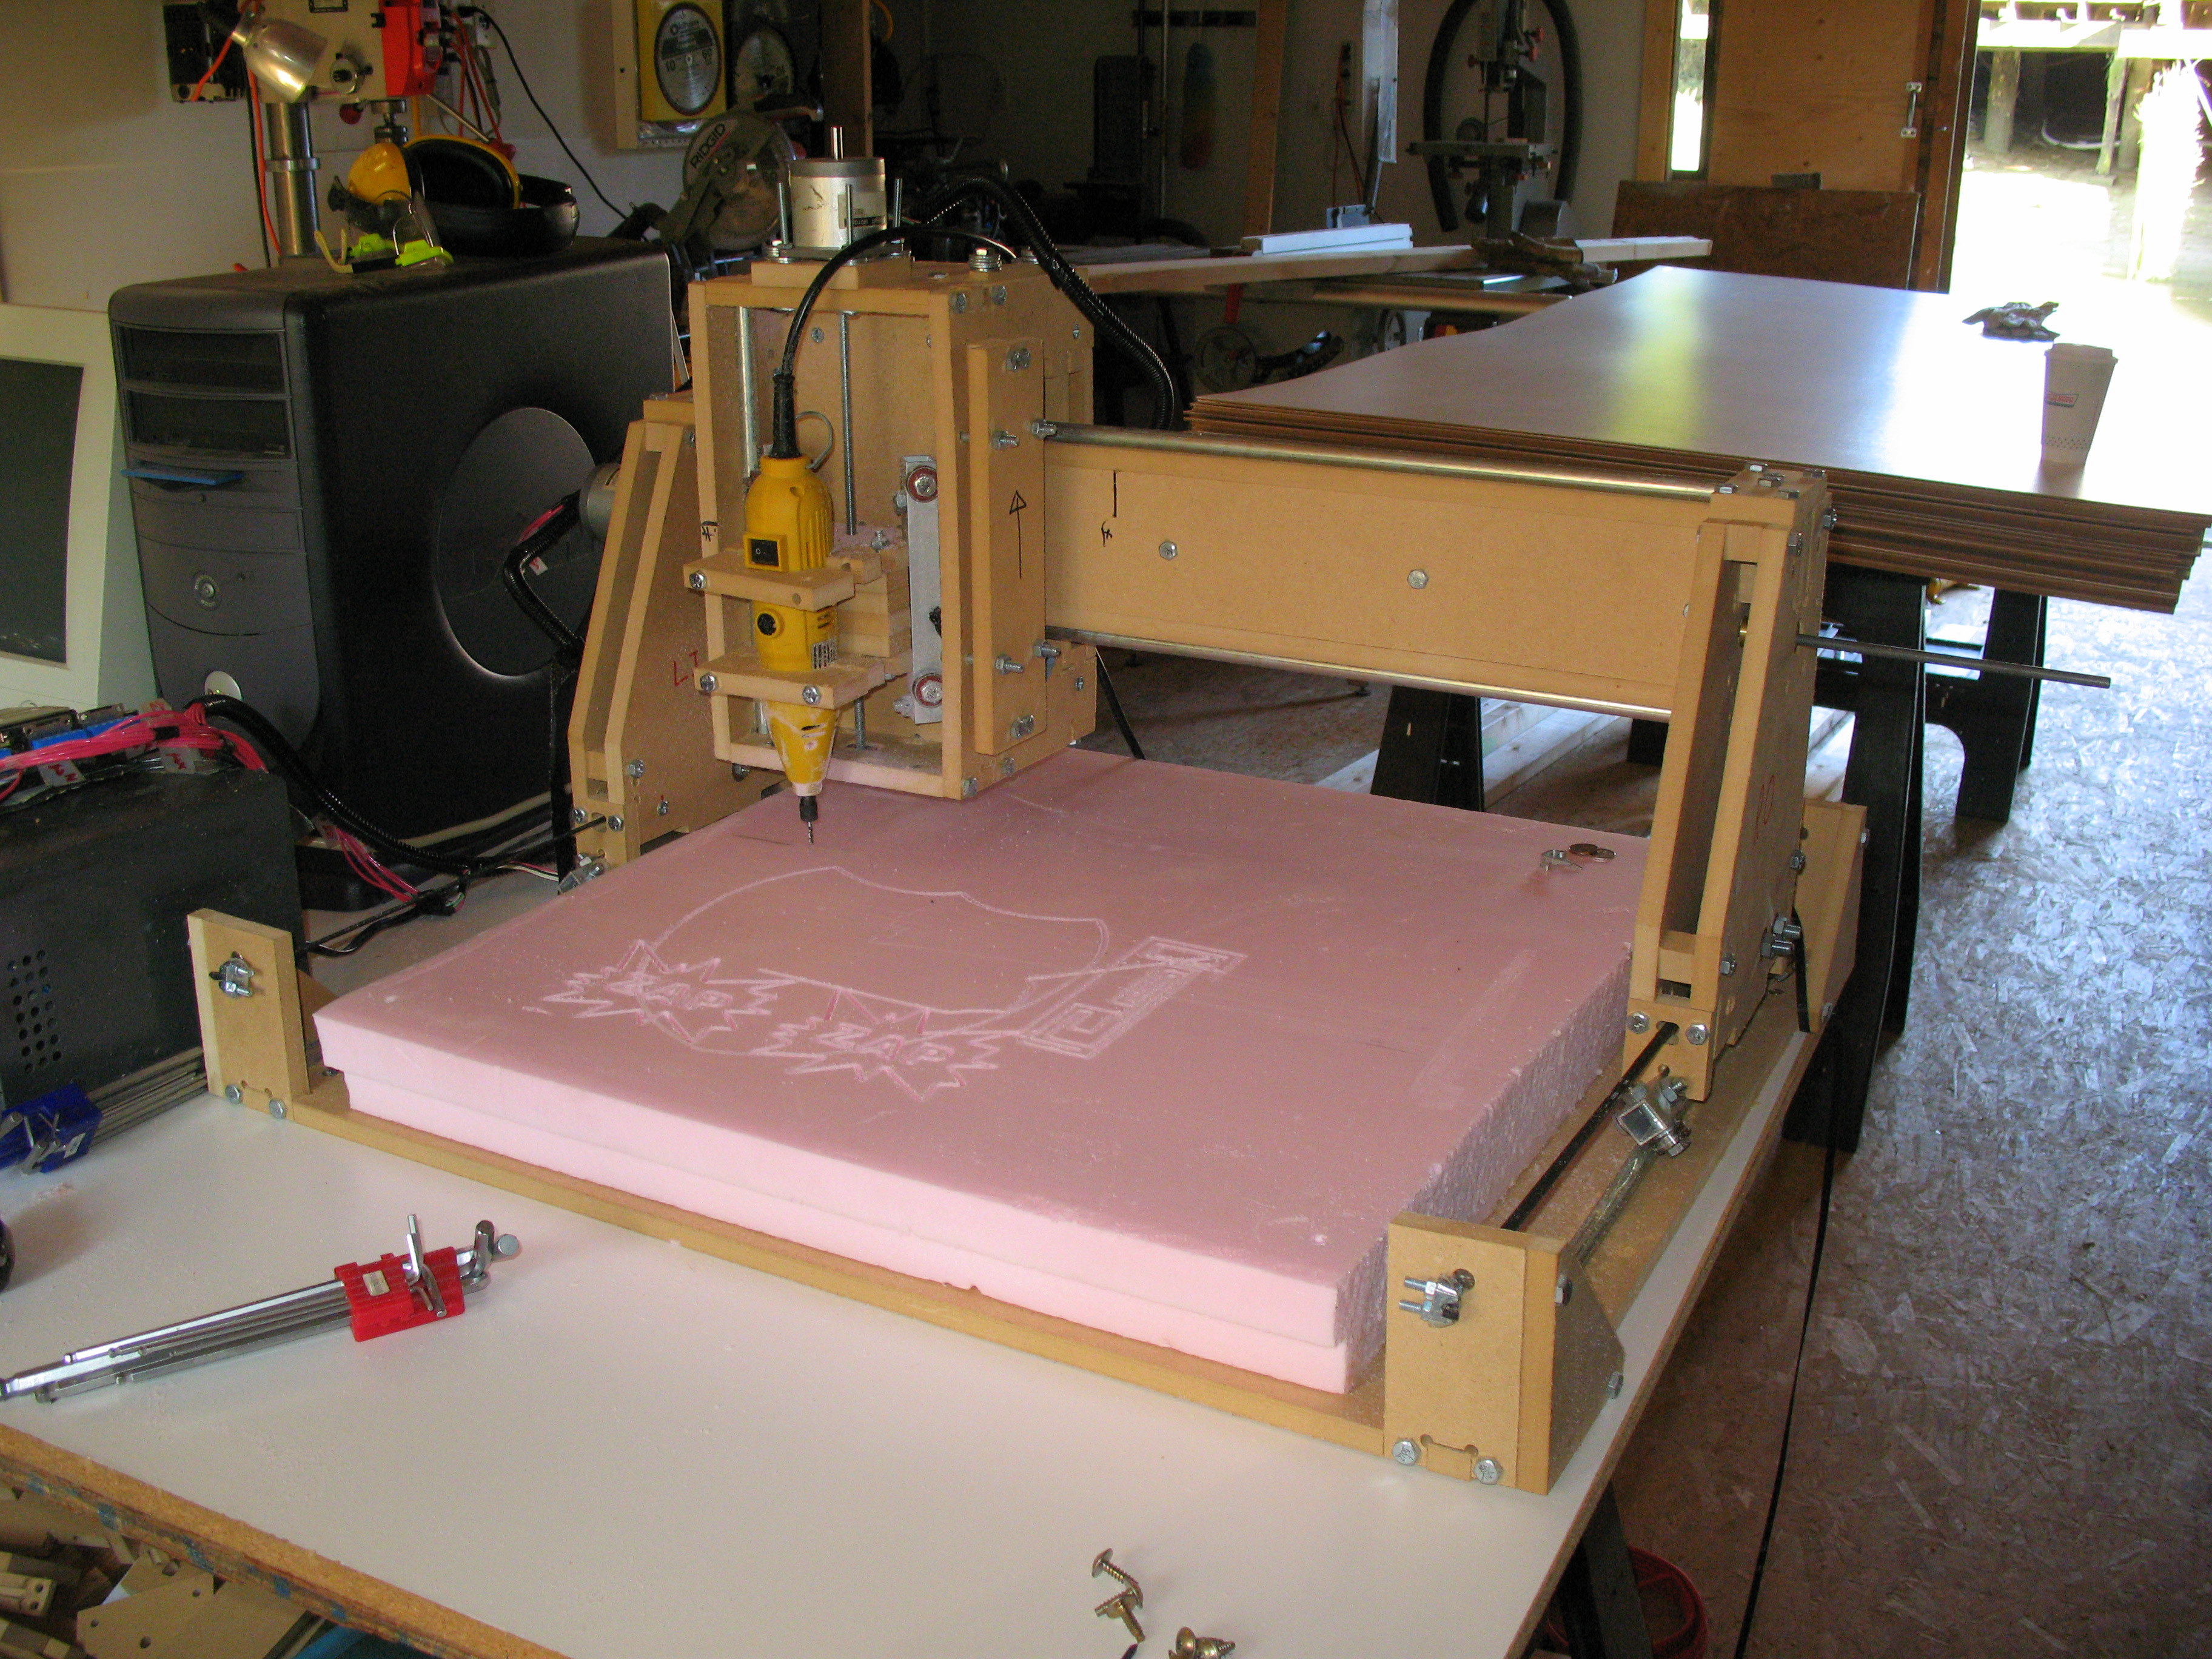 How to Make a Three Axis CNC Machine (Cheaply and Easily)